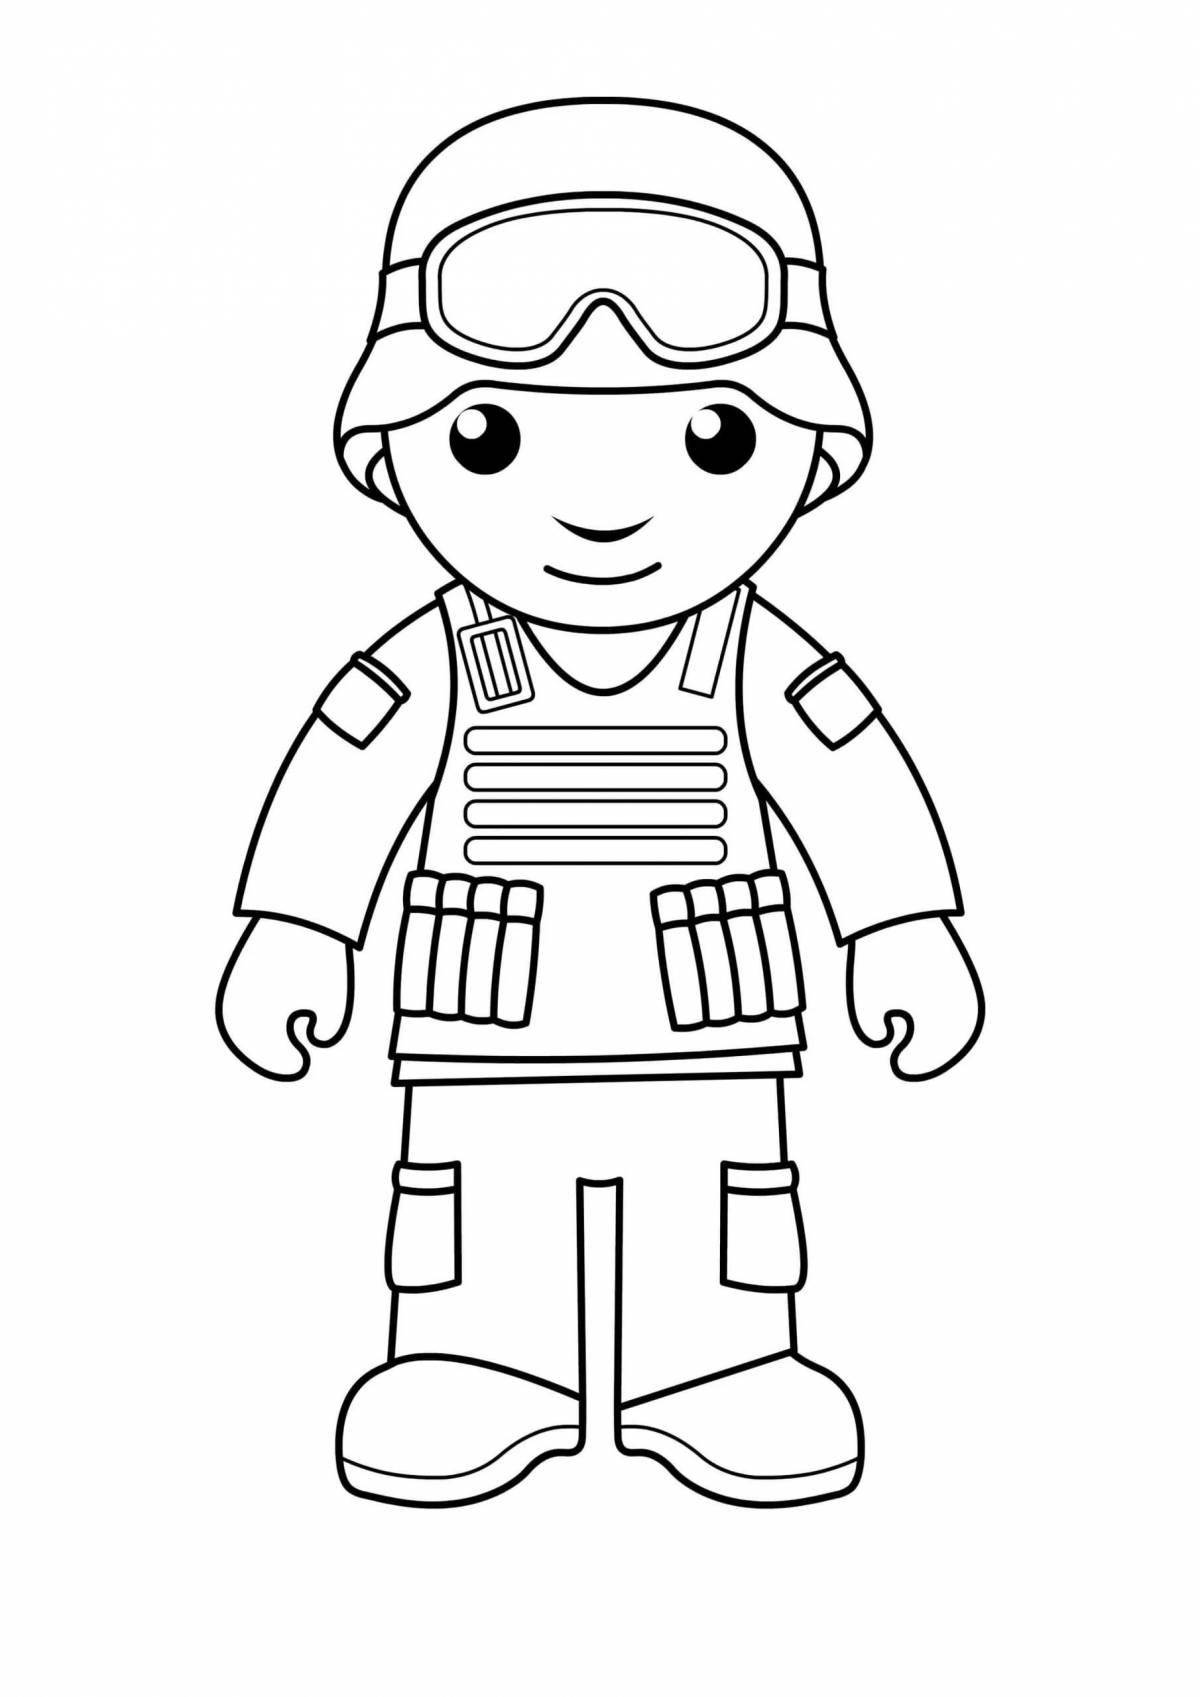 Animated soldier coloring Feb 23